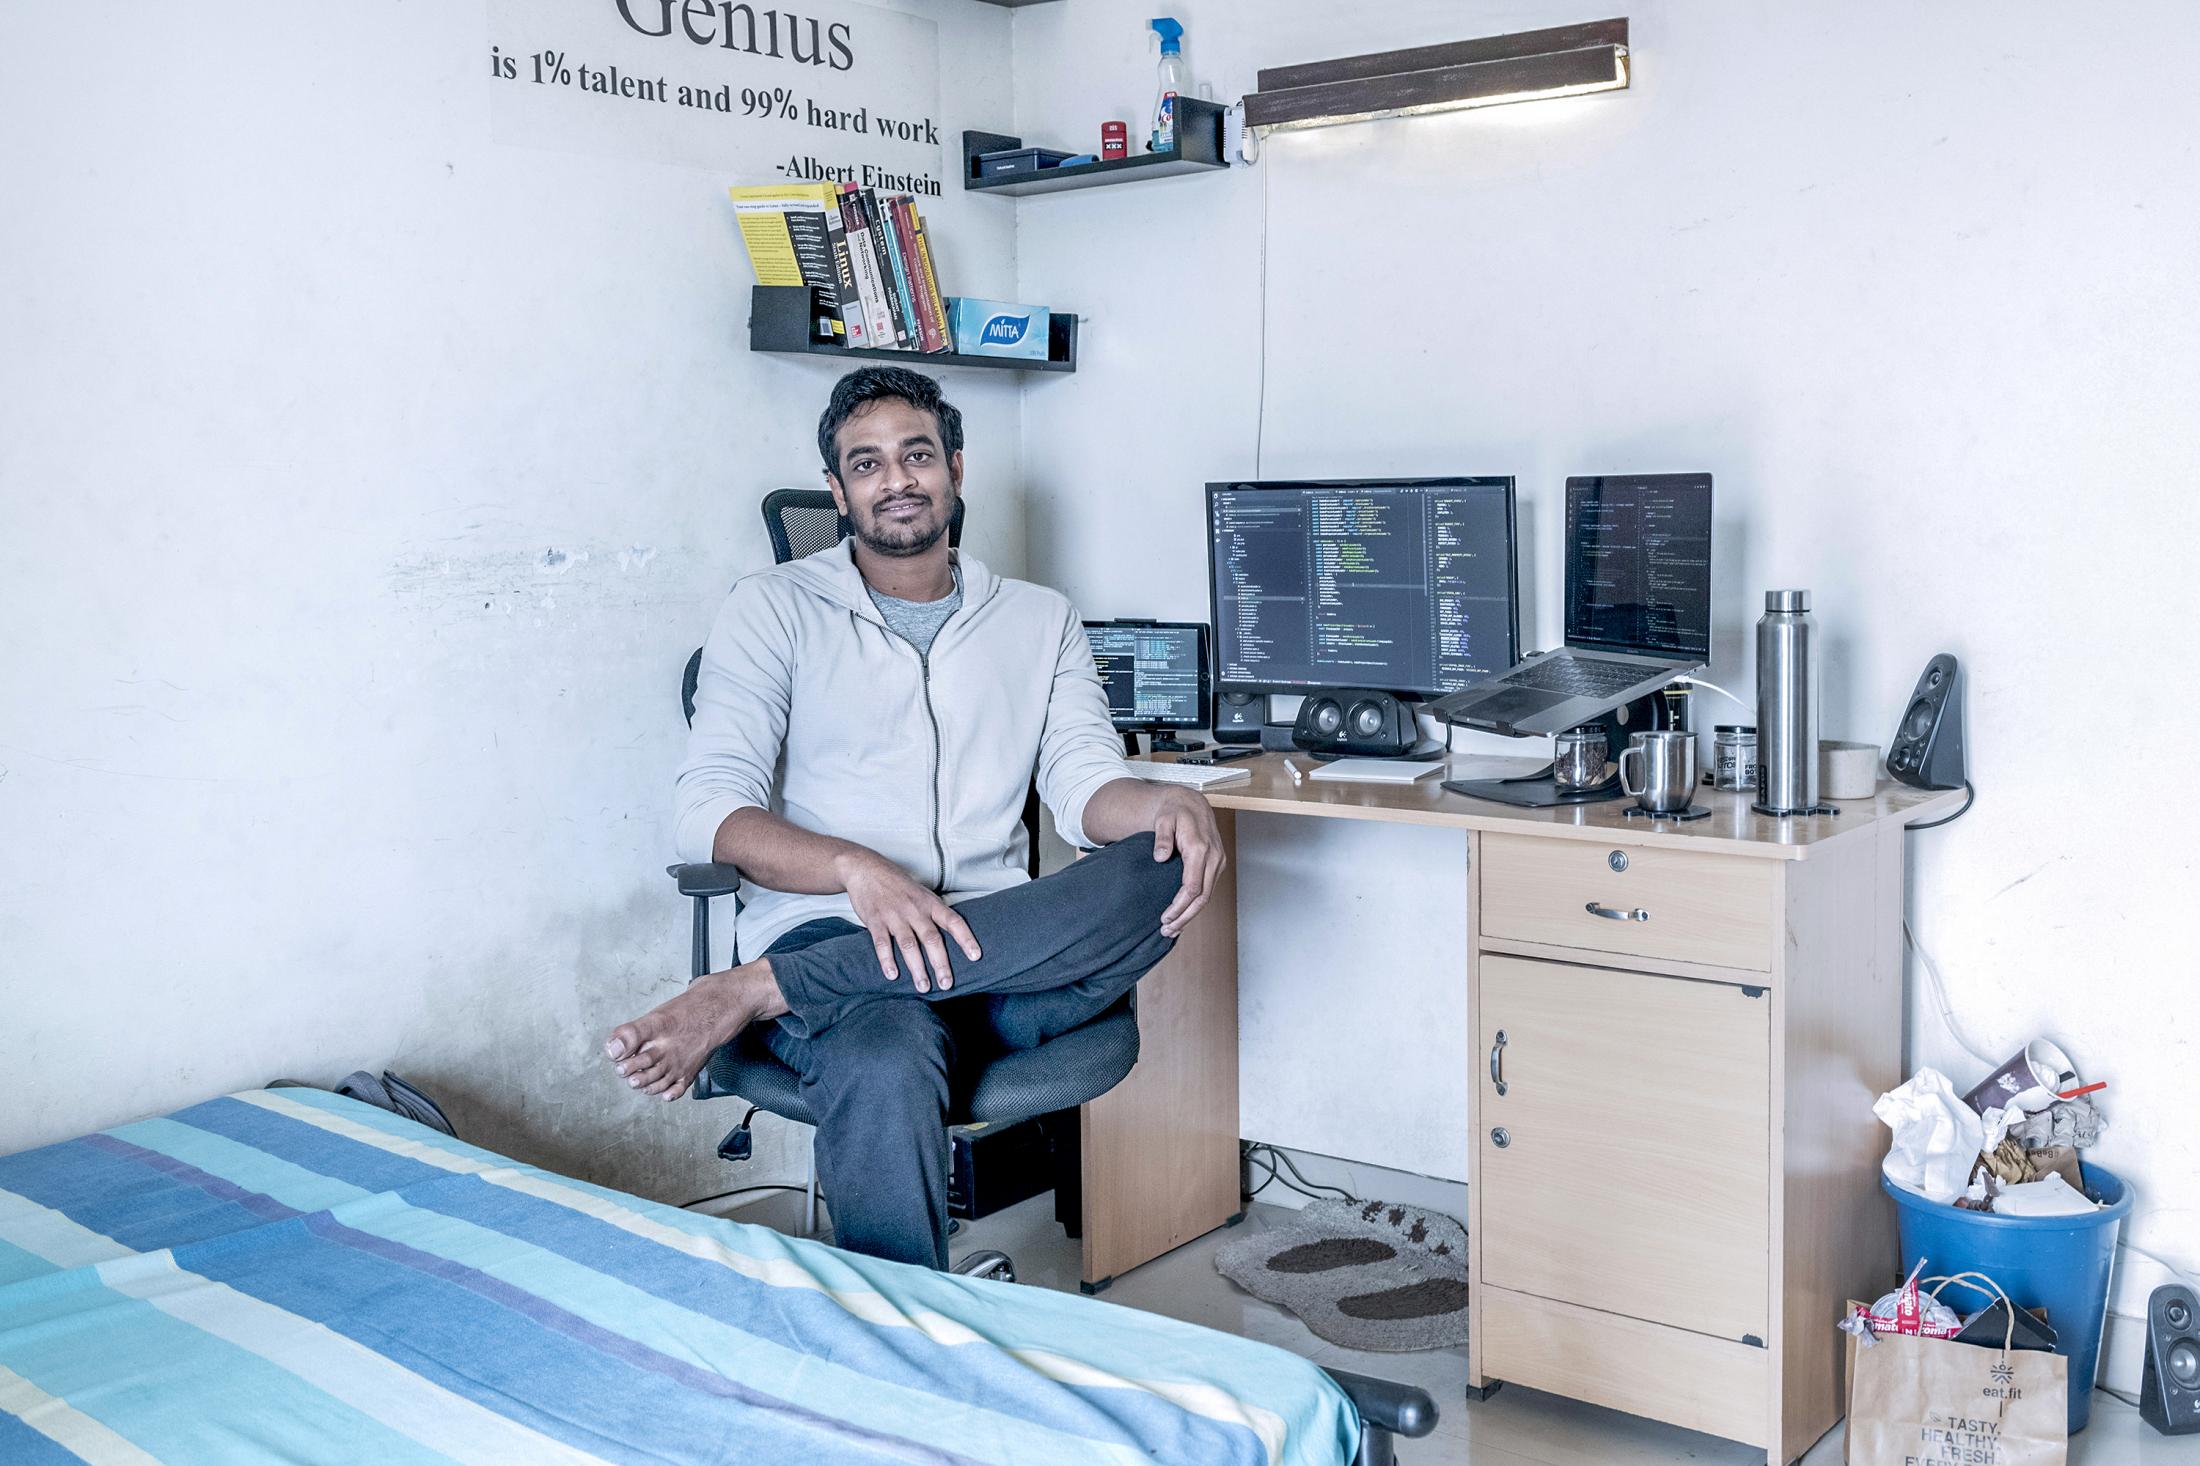 City Of Techies - “I prefer to work remotely as it gives me the...